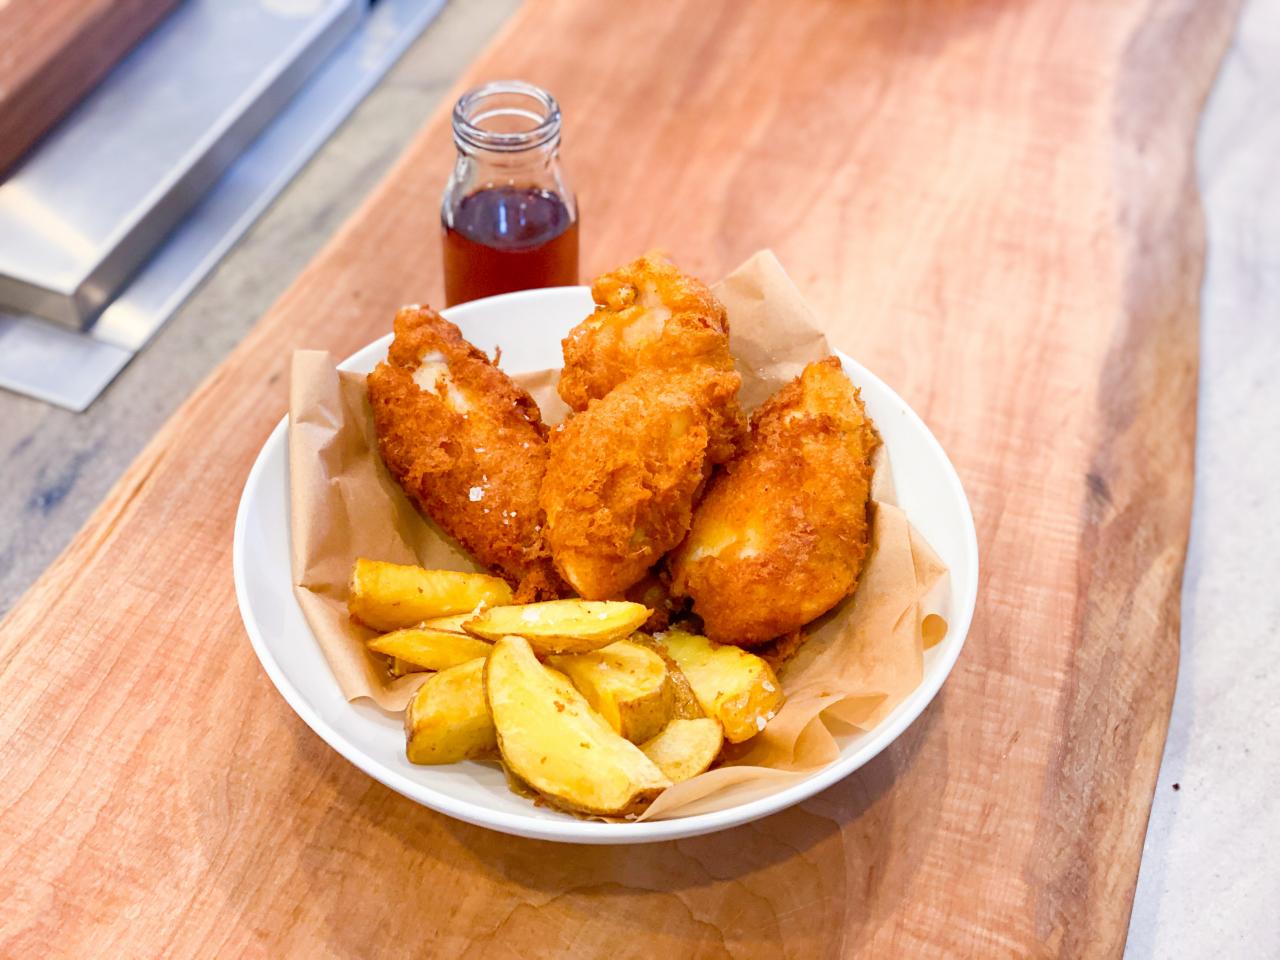 Best Beer-Battered Fish and Chips Recipe - How To Make Fried Fish and Chips